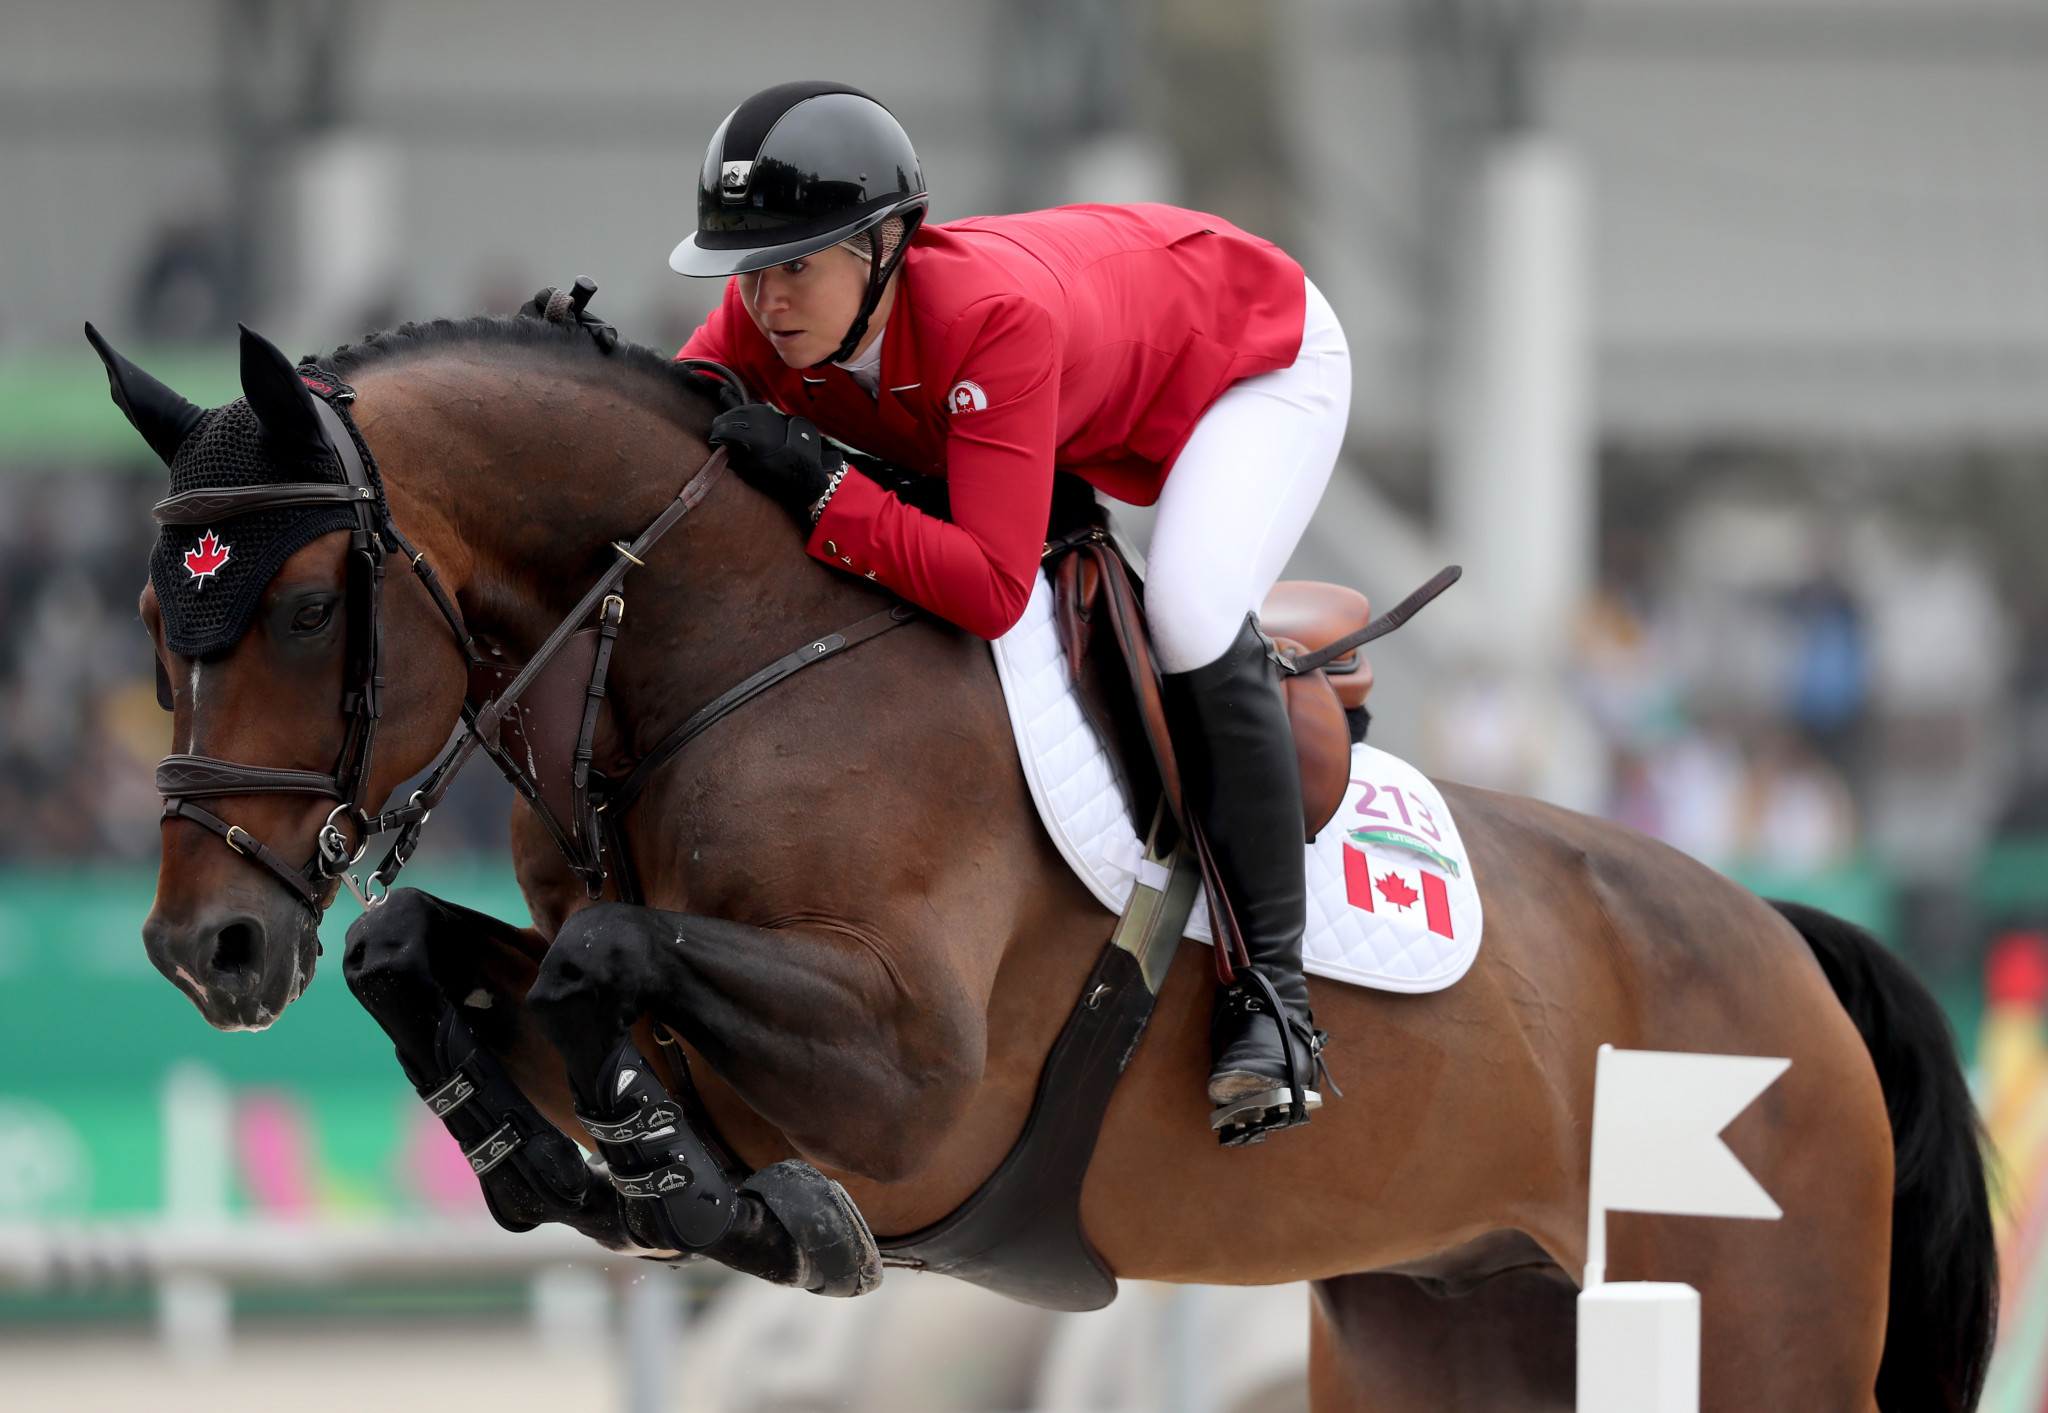 Canada's showjumping team dropped from Tokyo 2020 due to anti-doping violation